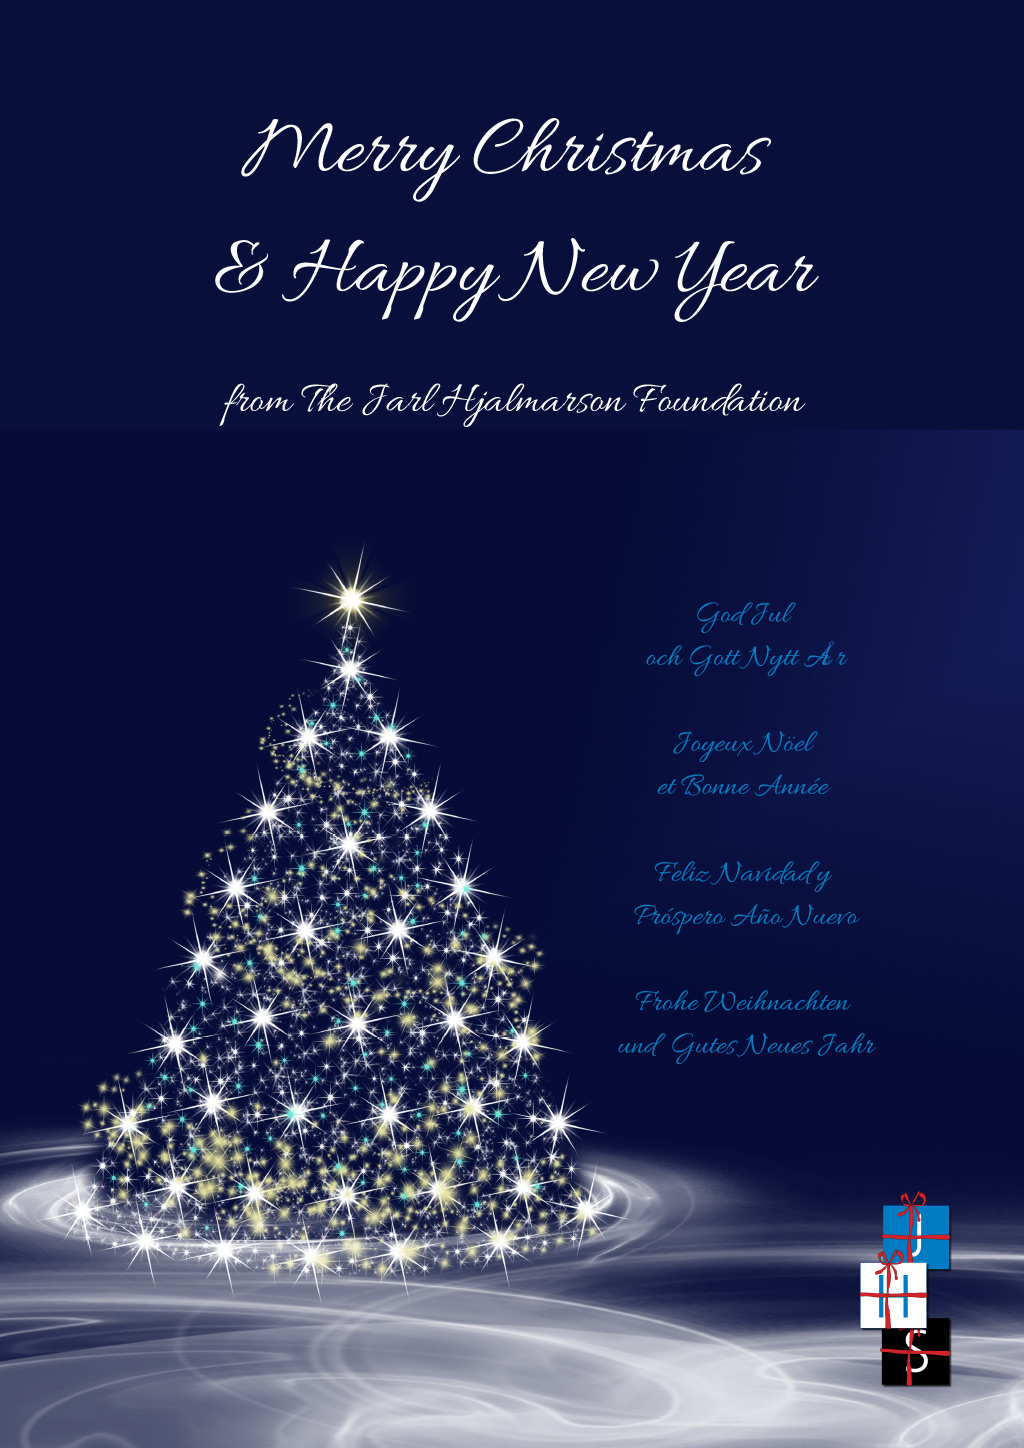 Merry Christmas & Happy New Year from The Jarl Hjalmarson Foundation